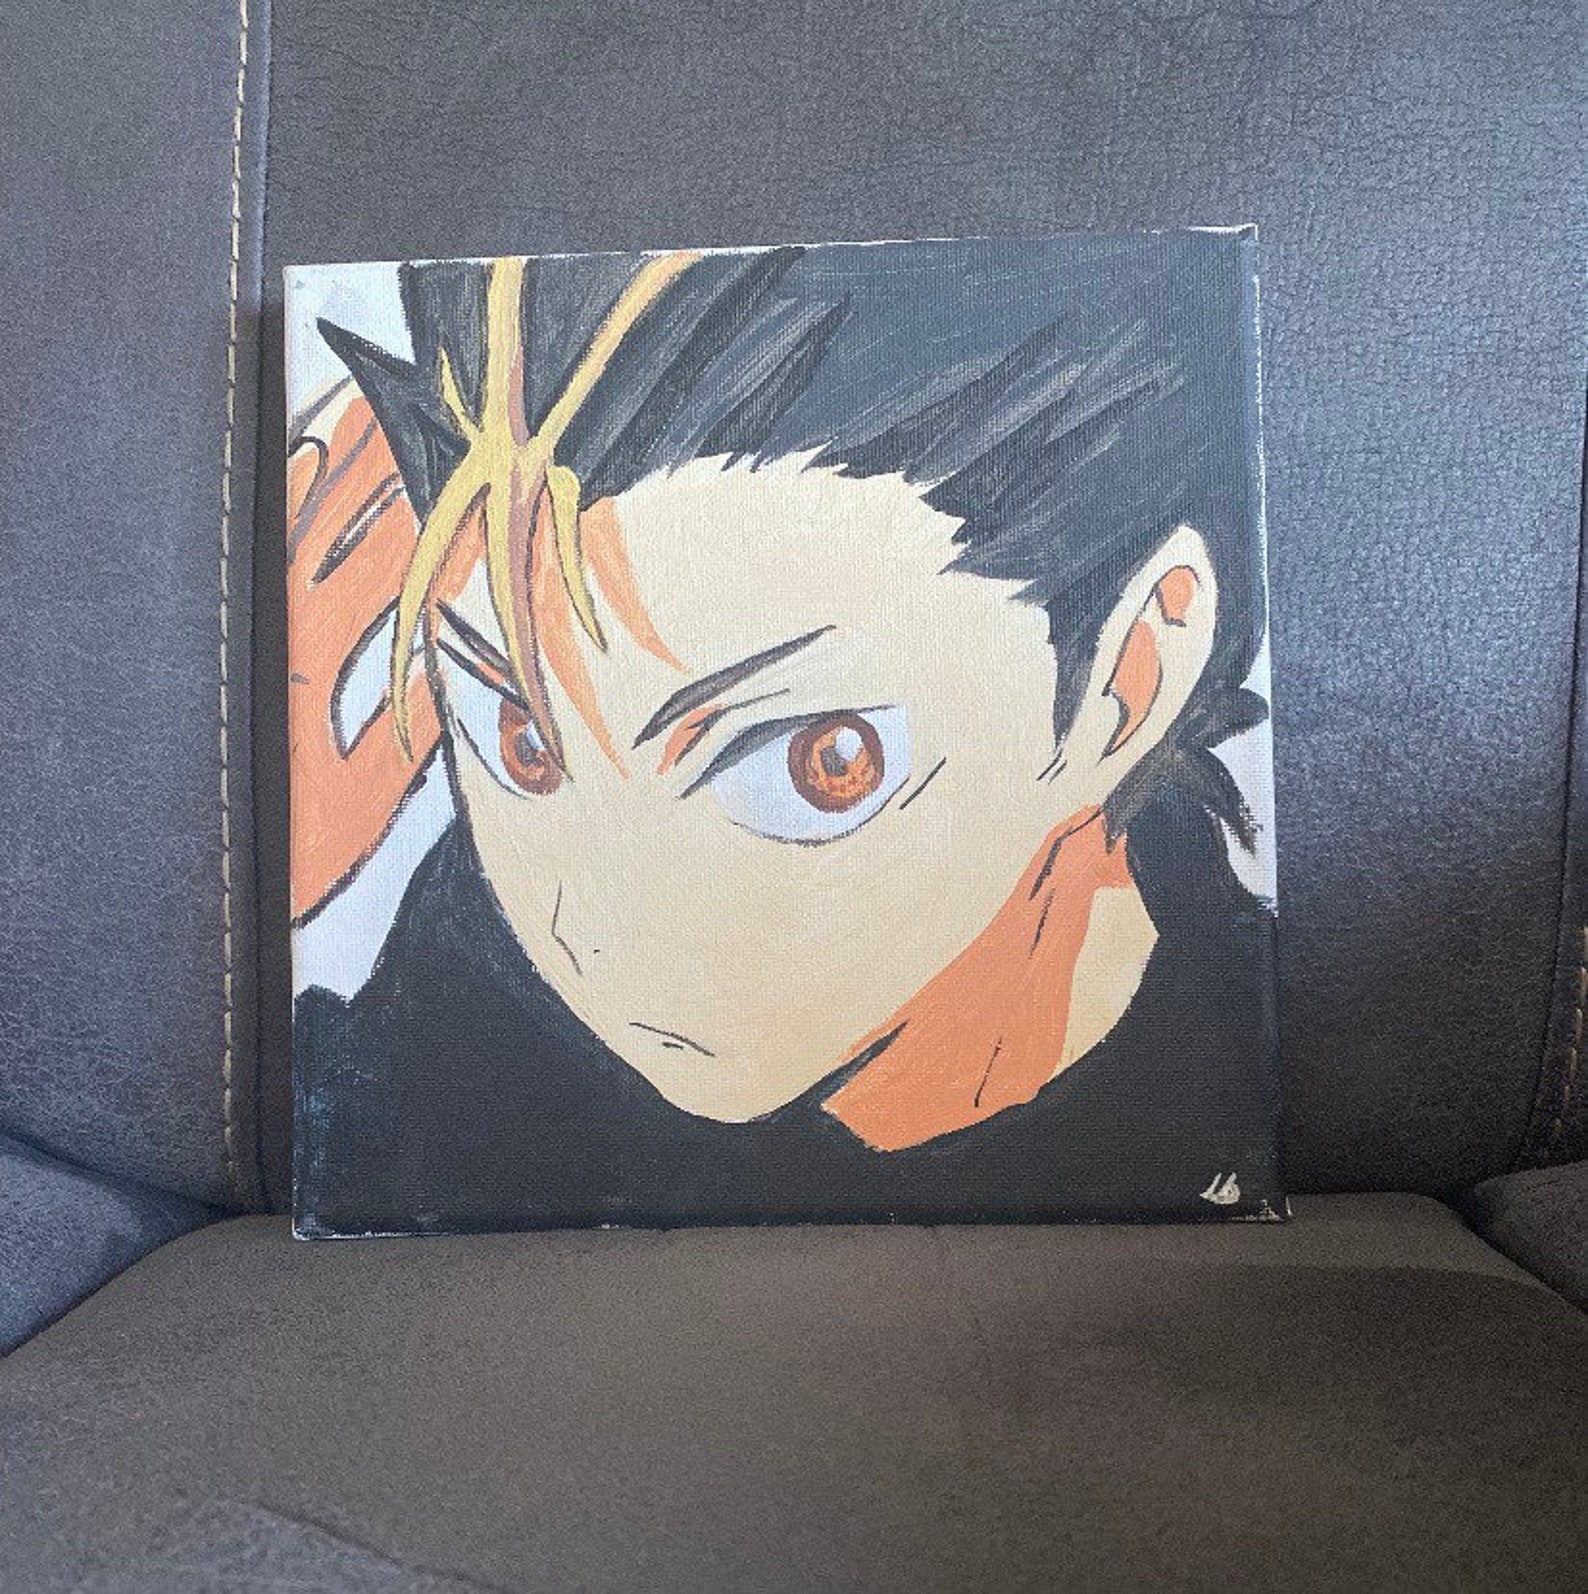 Anime Canvas Paintings Commissions 20x20cm | Etsy